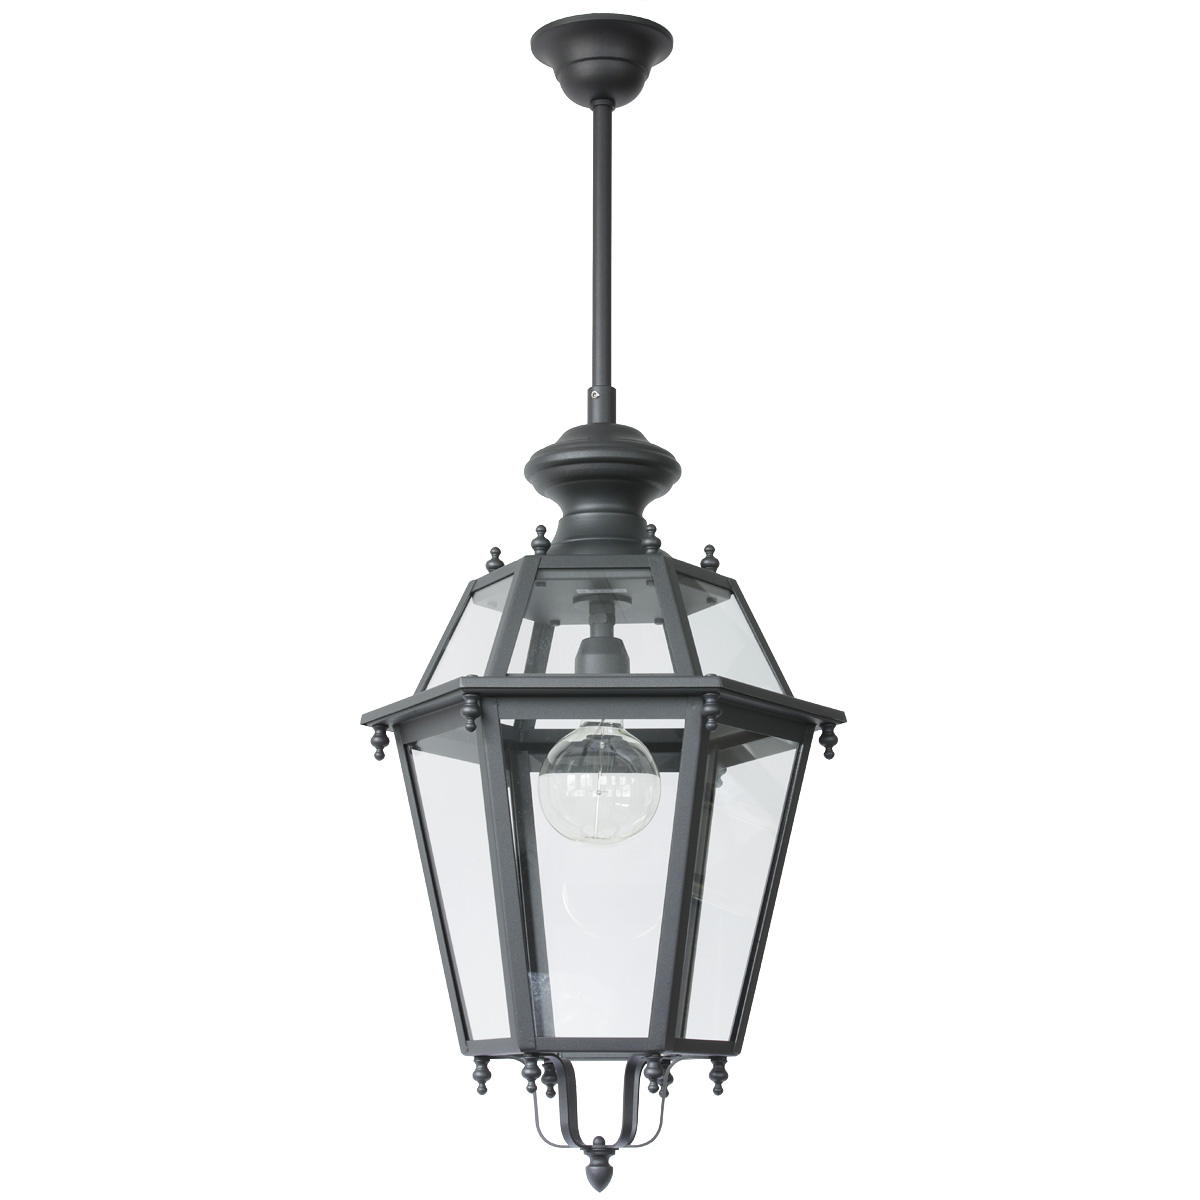 Historic Six-sided Ceiling Light for Outdoors